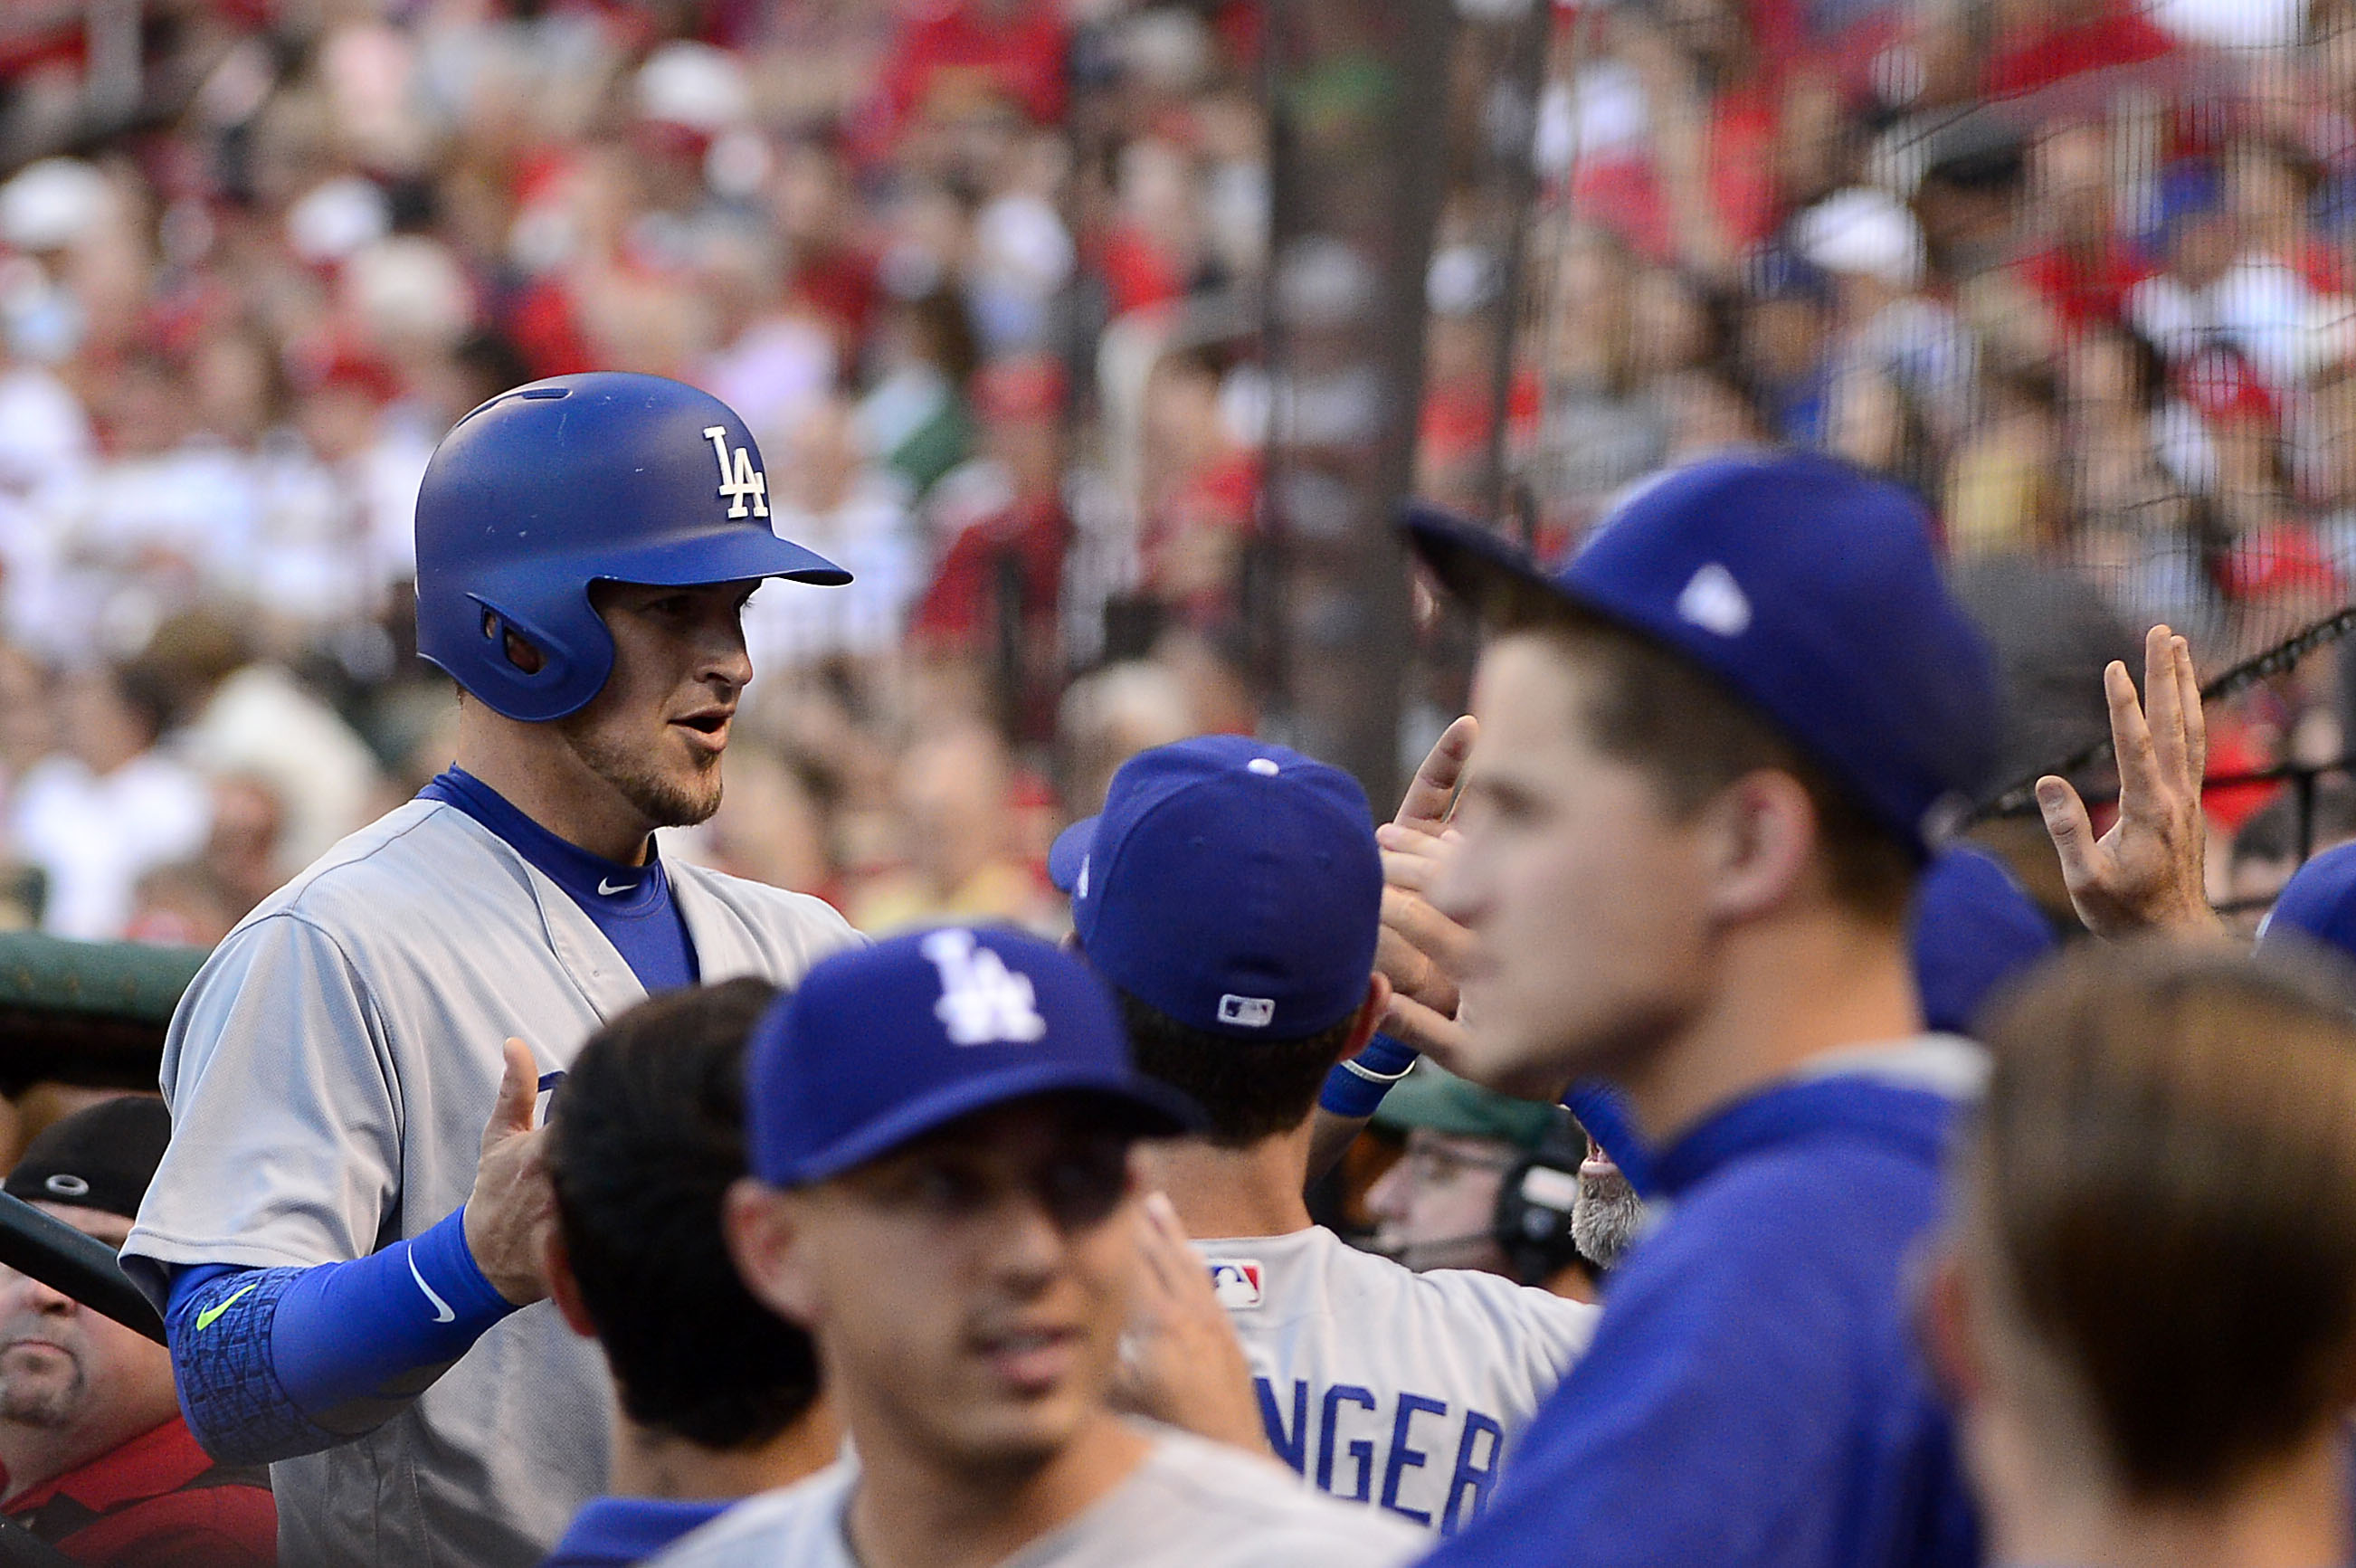 Los Angeles Dodgers: Reasons the team is poised to make noise